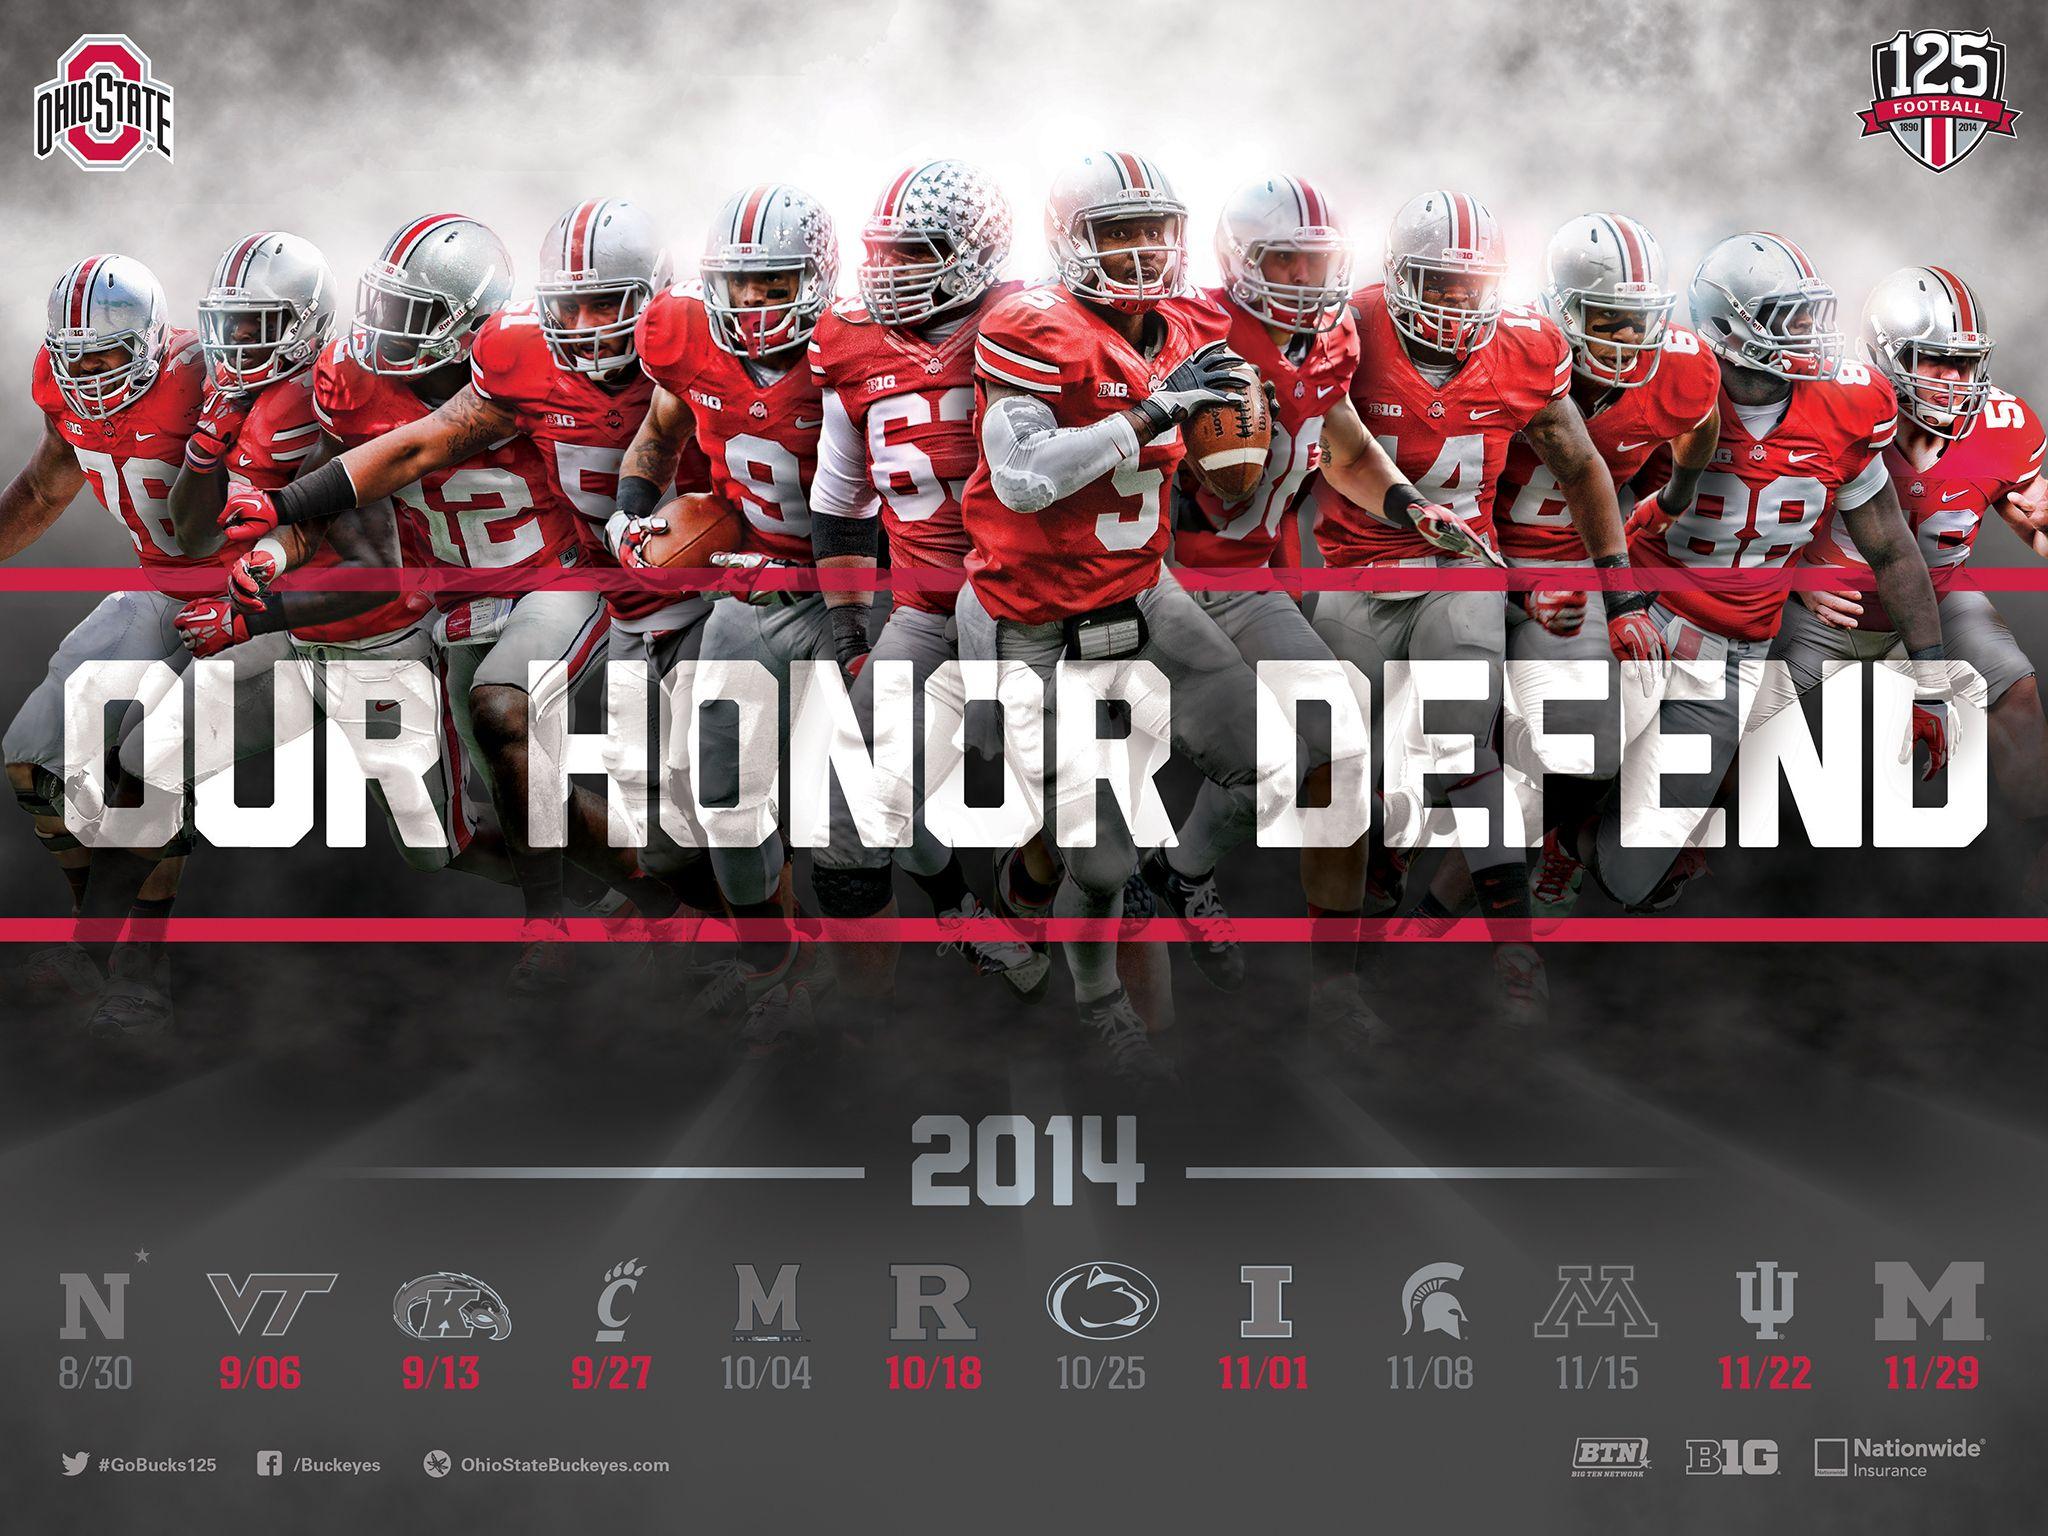 Download The Ohio State Football 2014 Schedule Poster for Printing